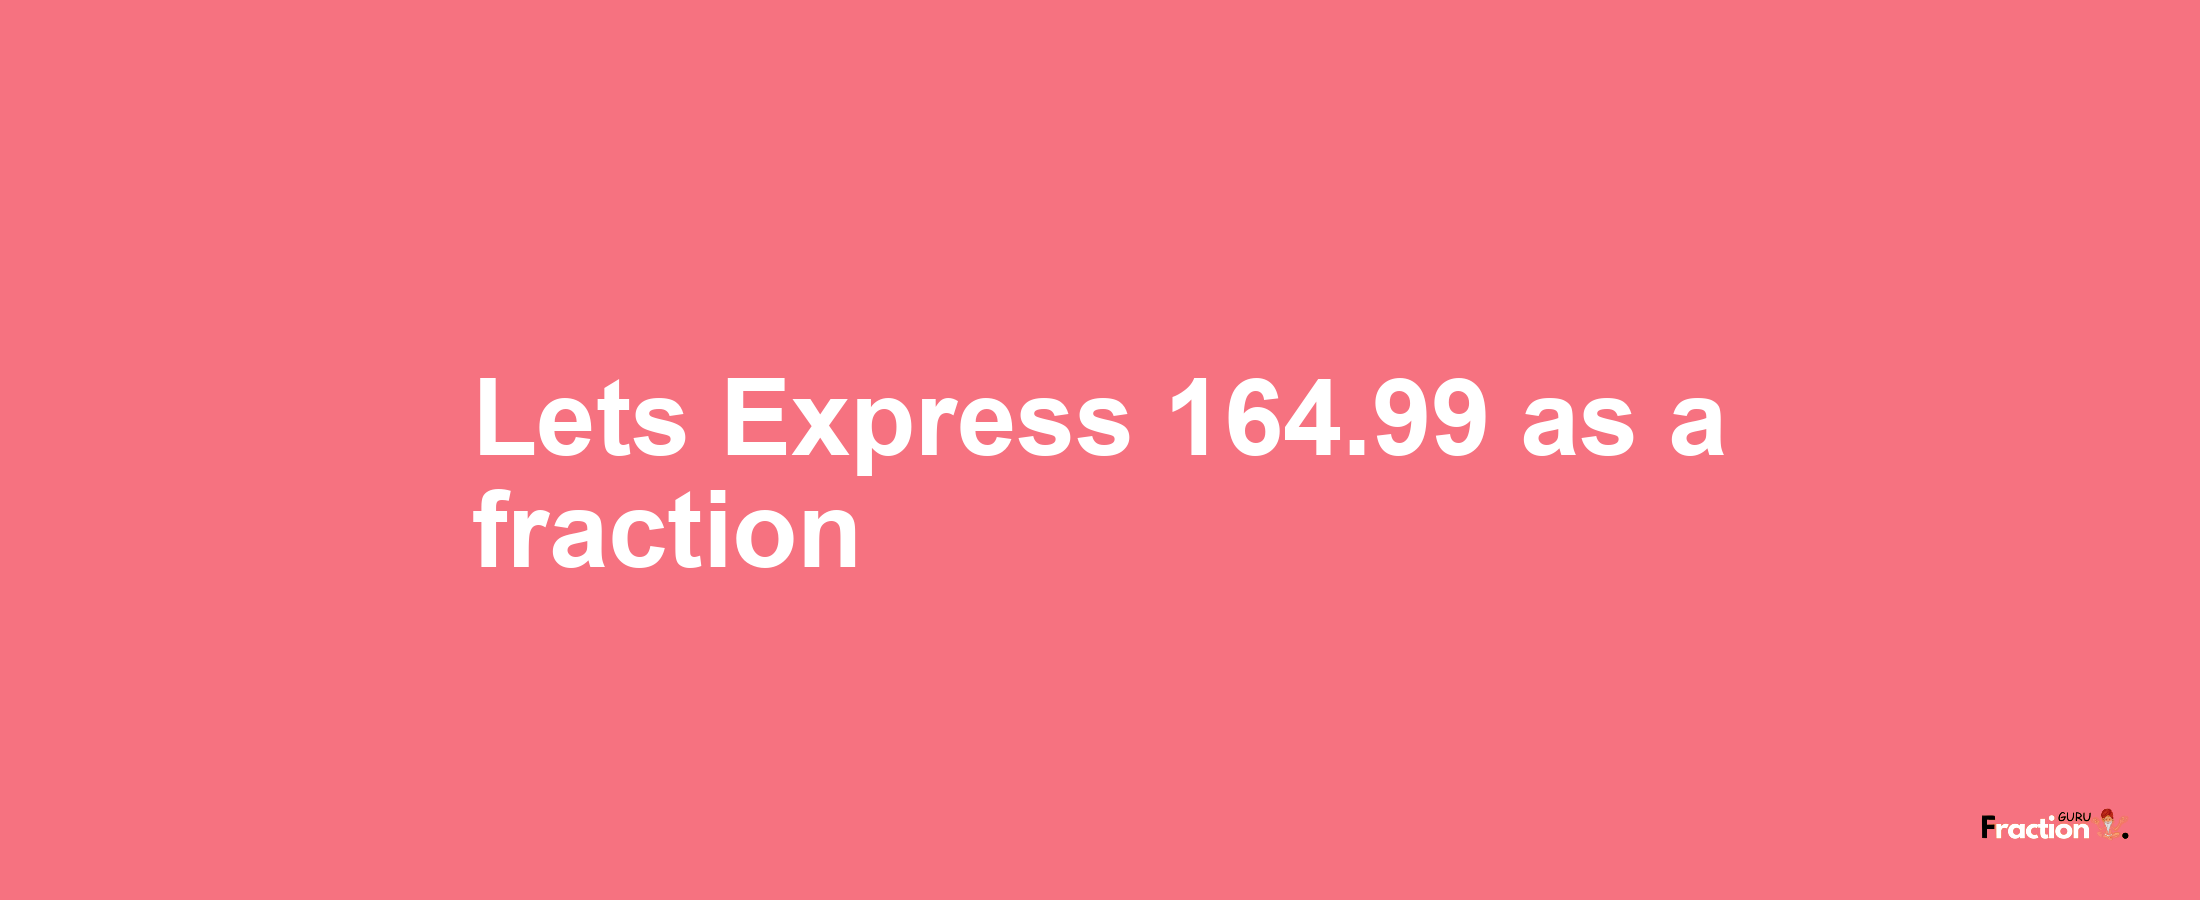 Lets Express 164.99 as afraction